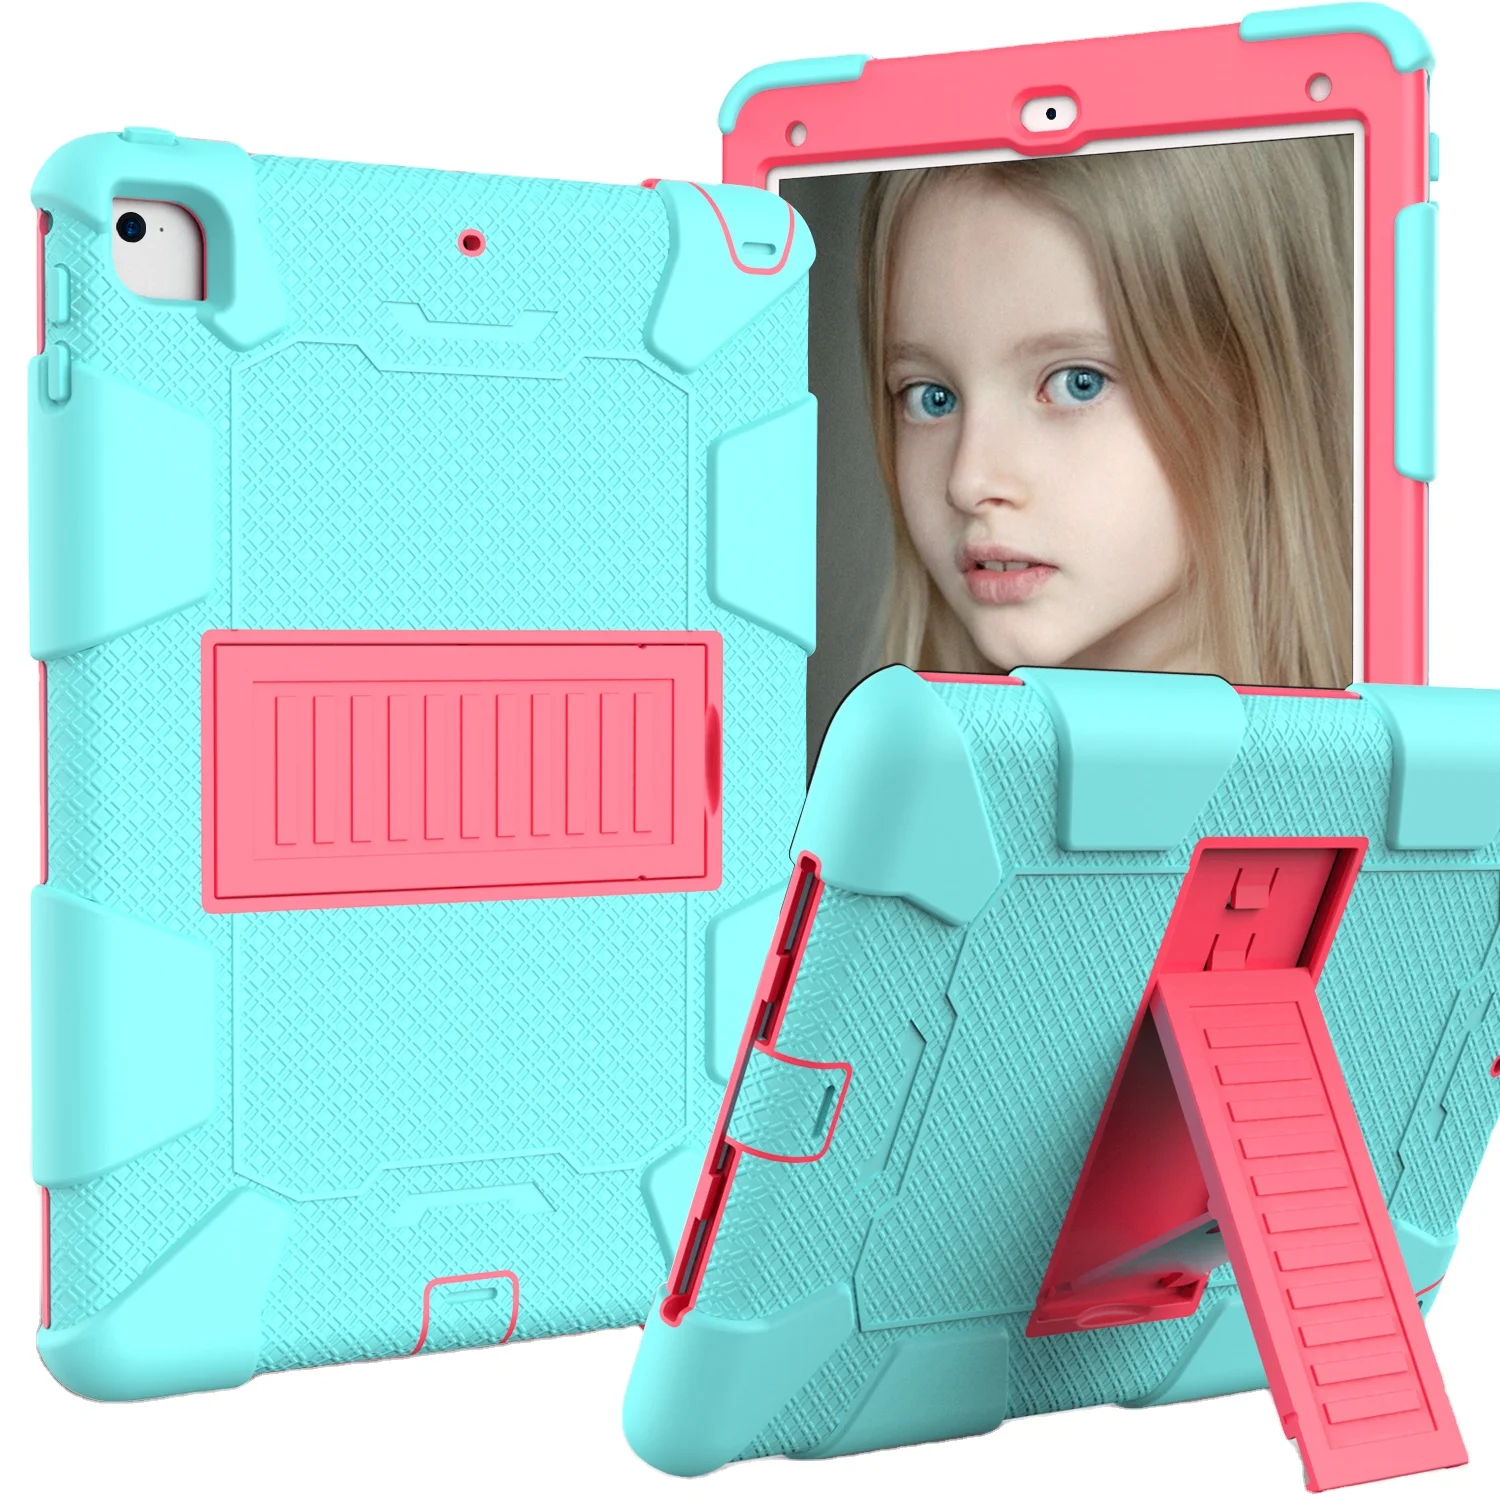 

for Samsung Galaxy Tab A 10.1 Inch Rugged Tablet Case with Kickstand, SM-T510 Full Body Shockproof Cover, Multi colors